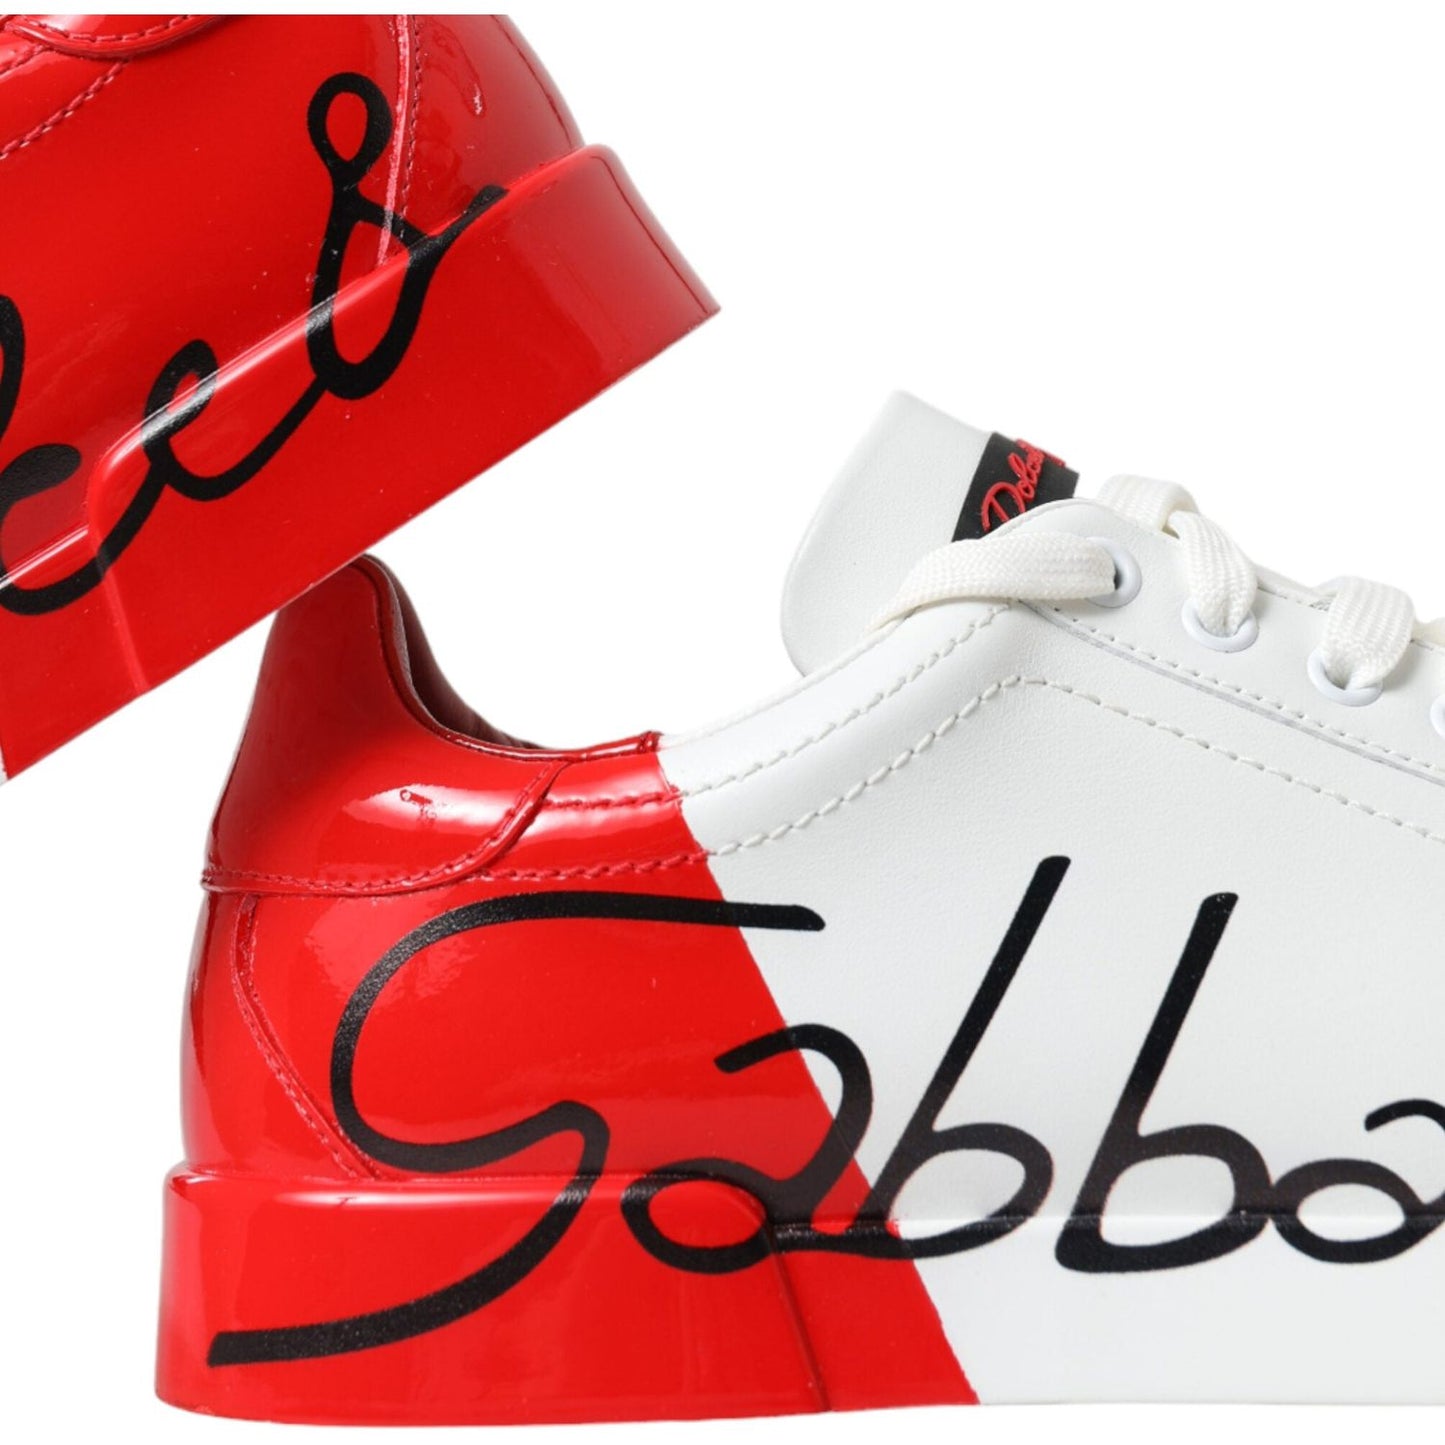 Dolce & Gabbana Chic Red and White Leather Sneakers chic-red-and-white-leather-sneakers